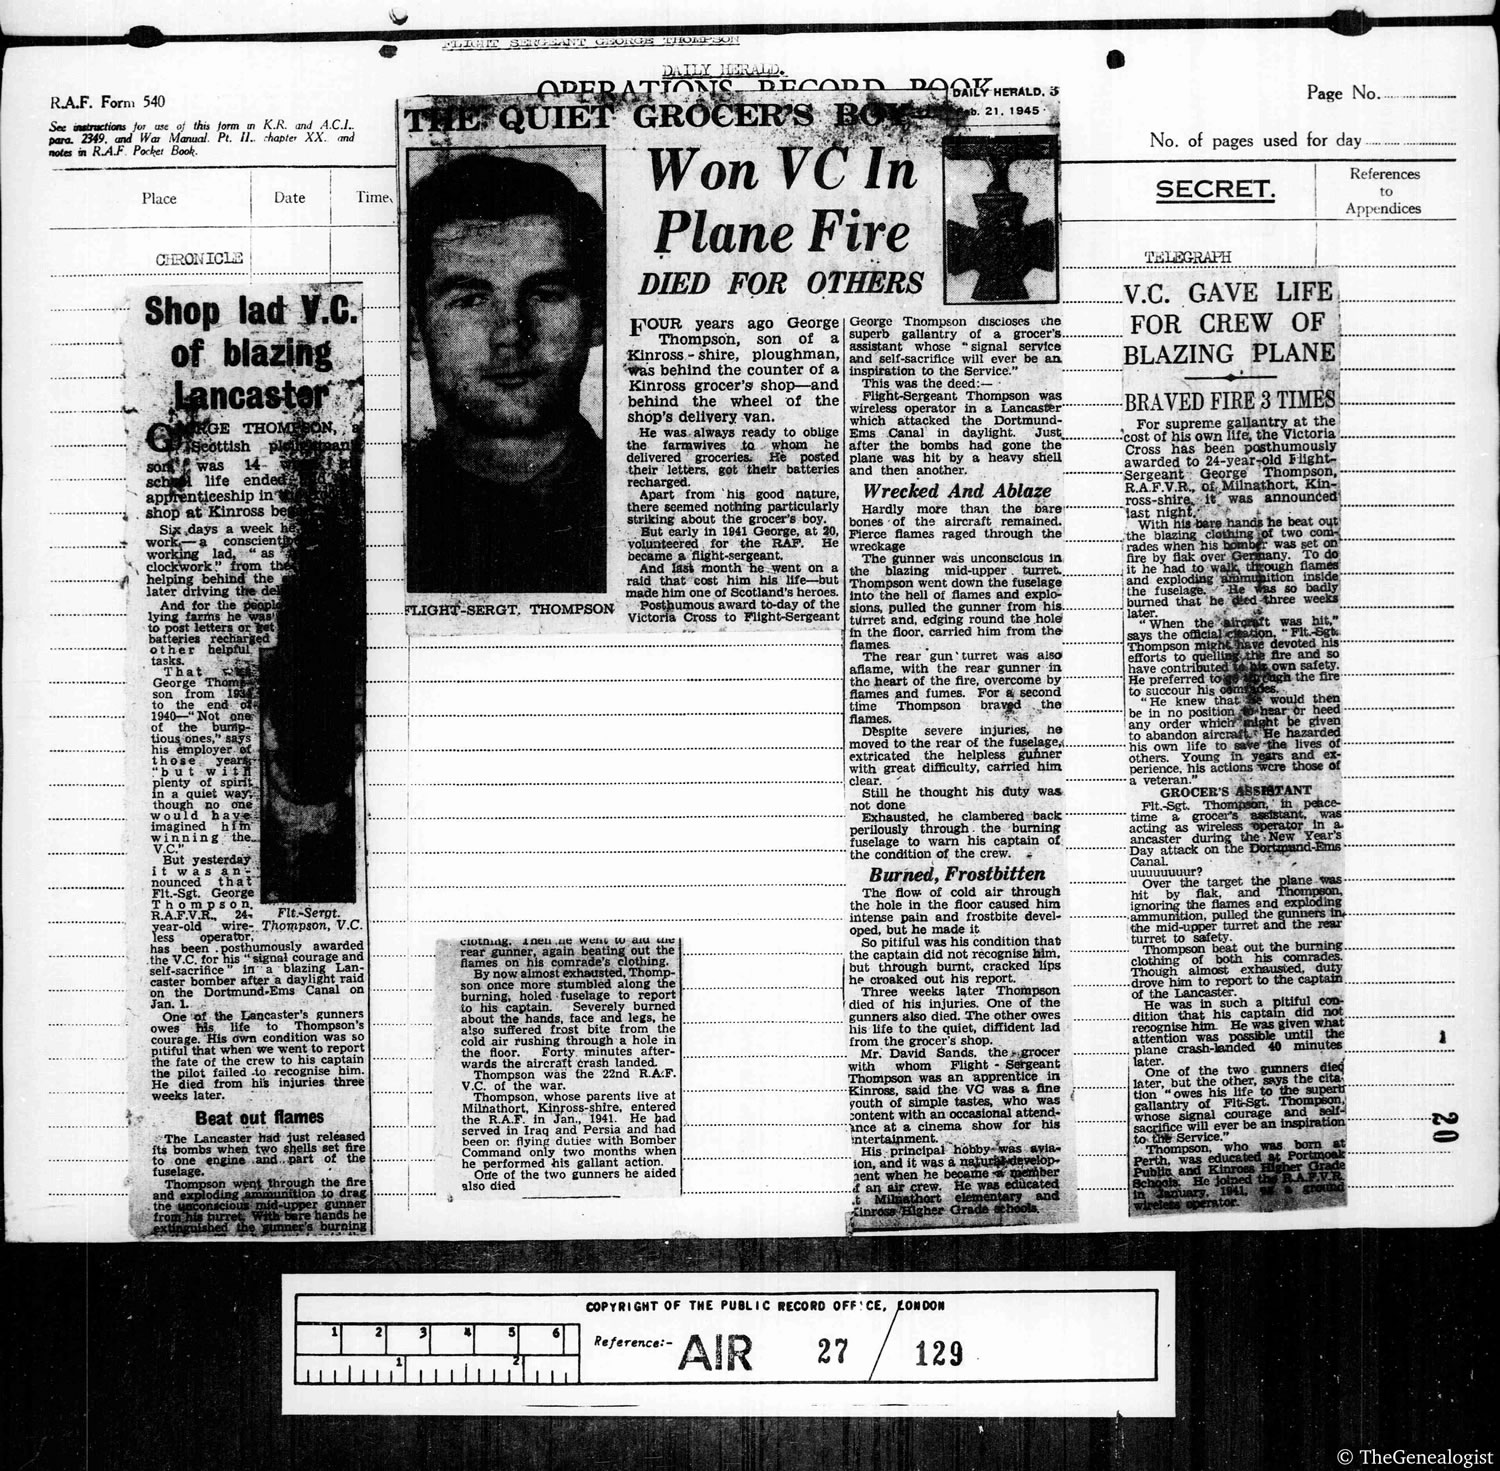 An unusual Air 27 record including newspaper clippings reporting F/Sgt George Thompson's posthumous award of the Victoria Cross in 1945